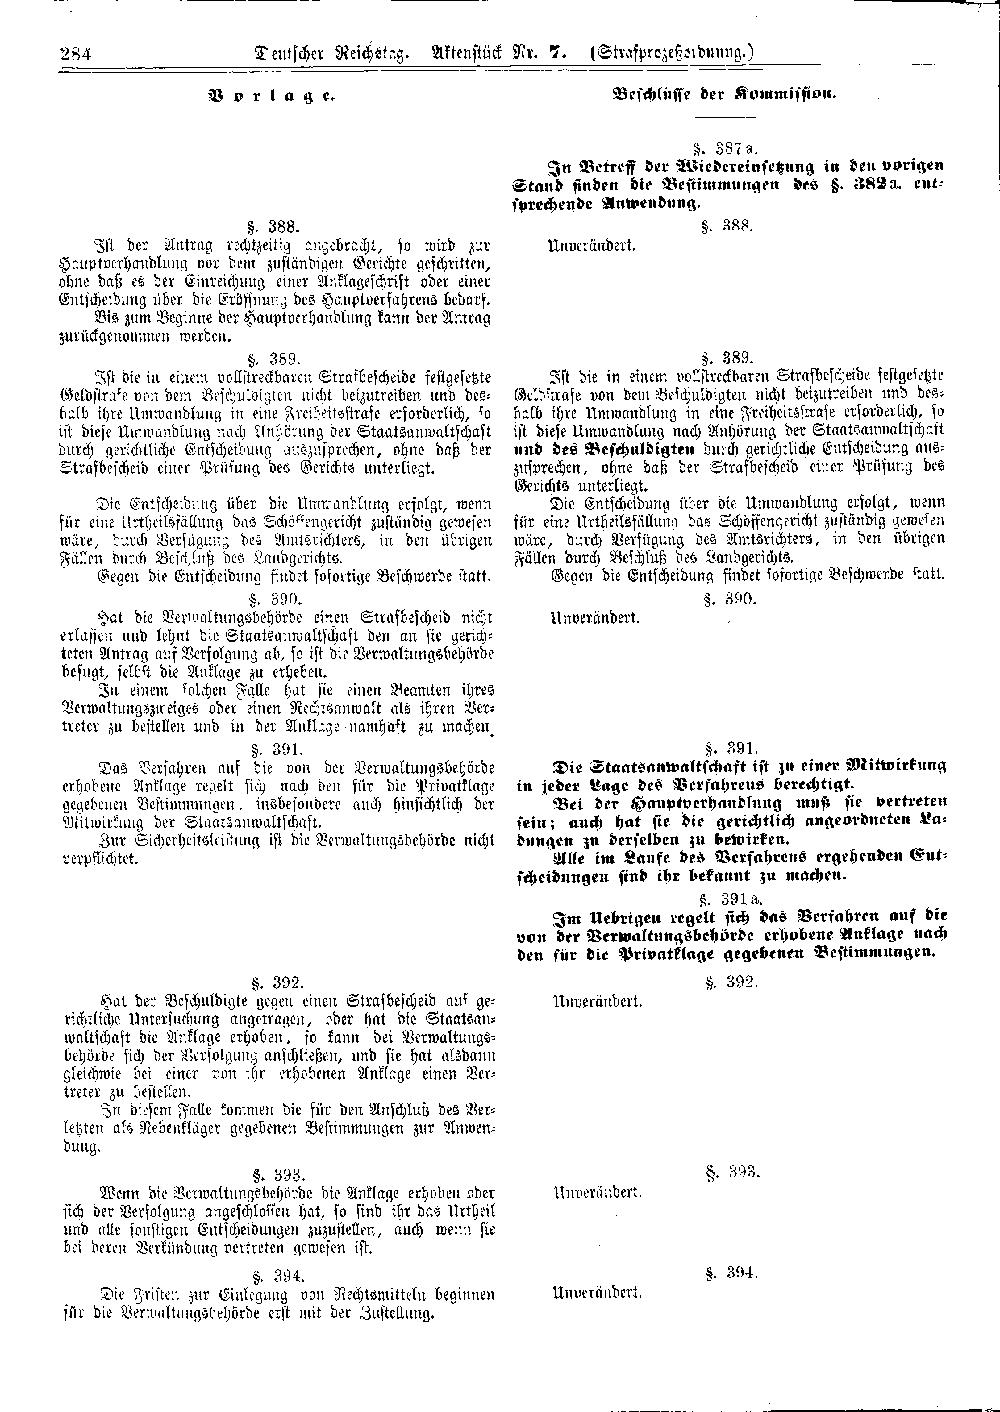 Scan of page 284